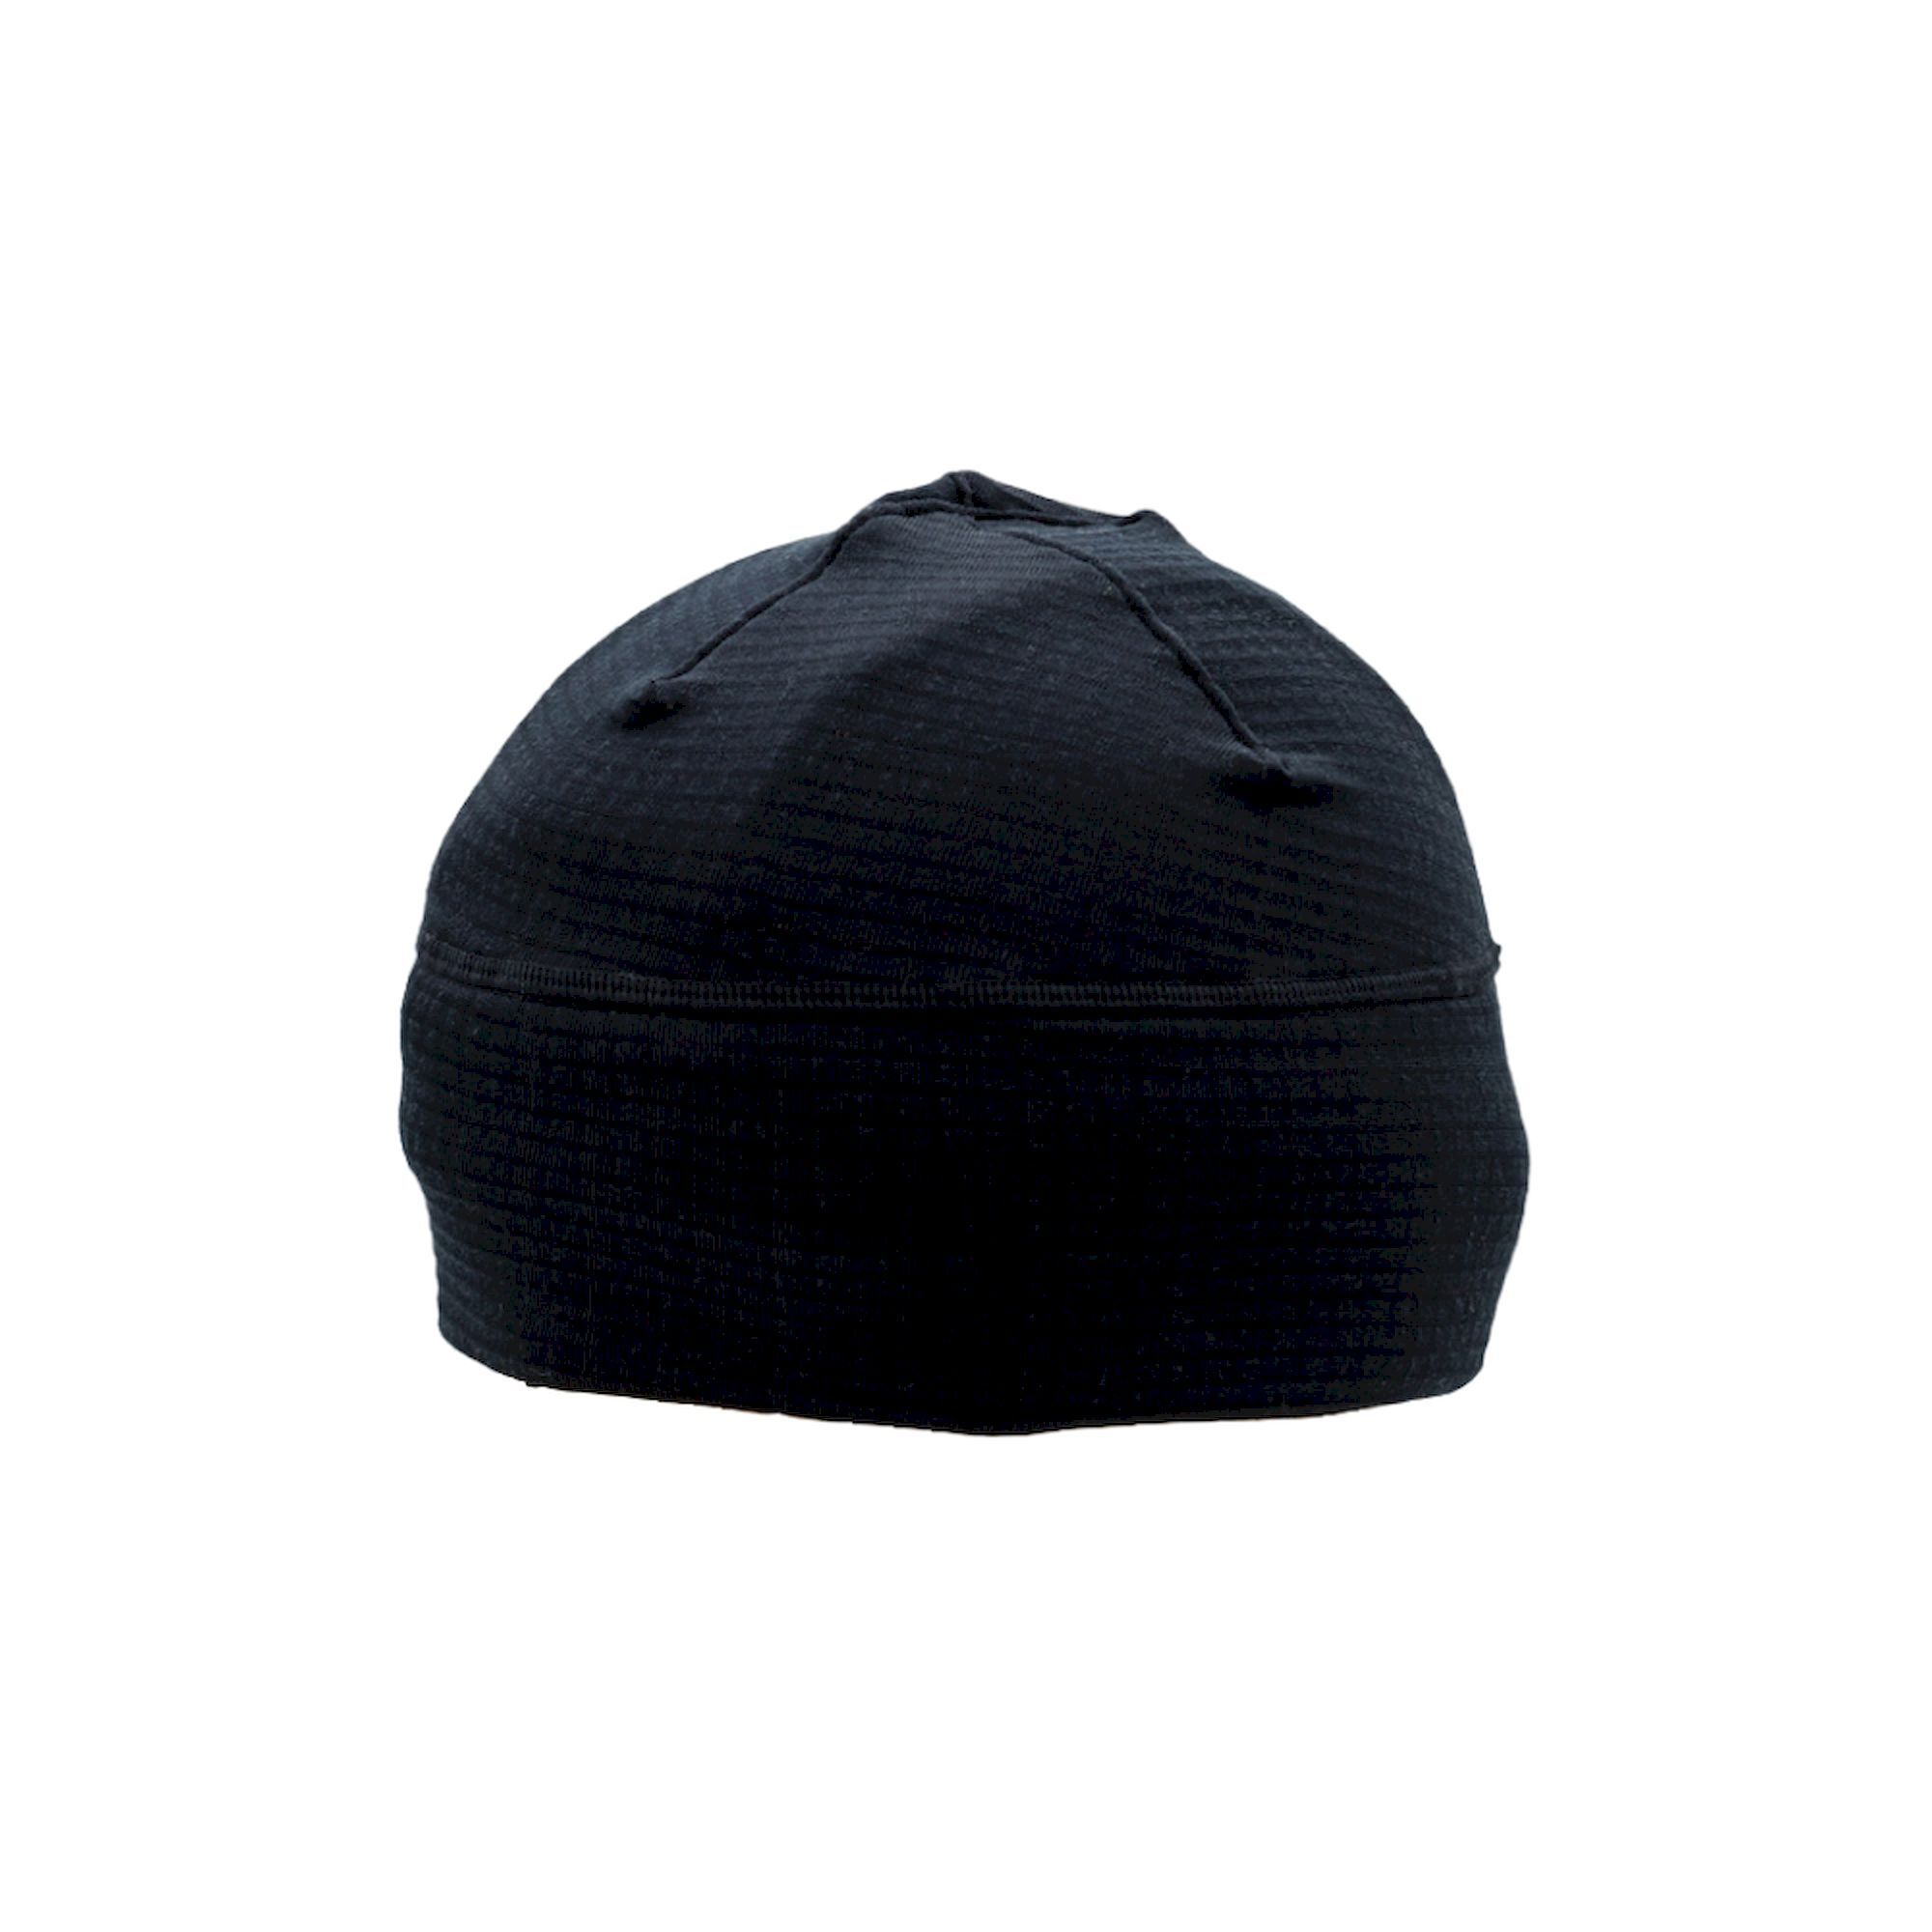 PAG Neckwear Technical Hat - Berretto